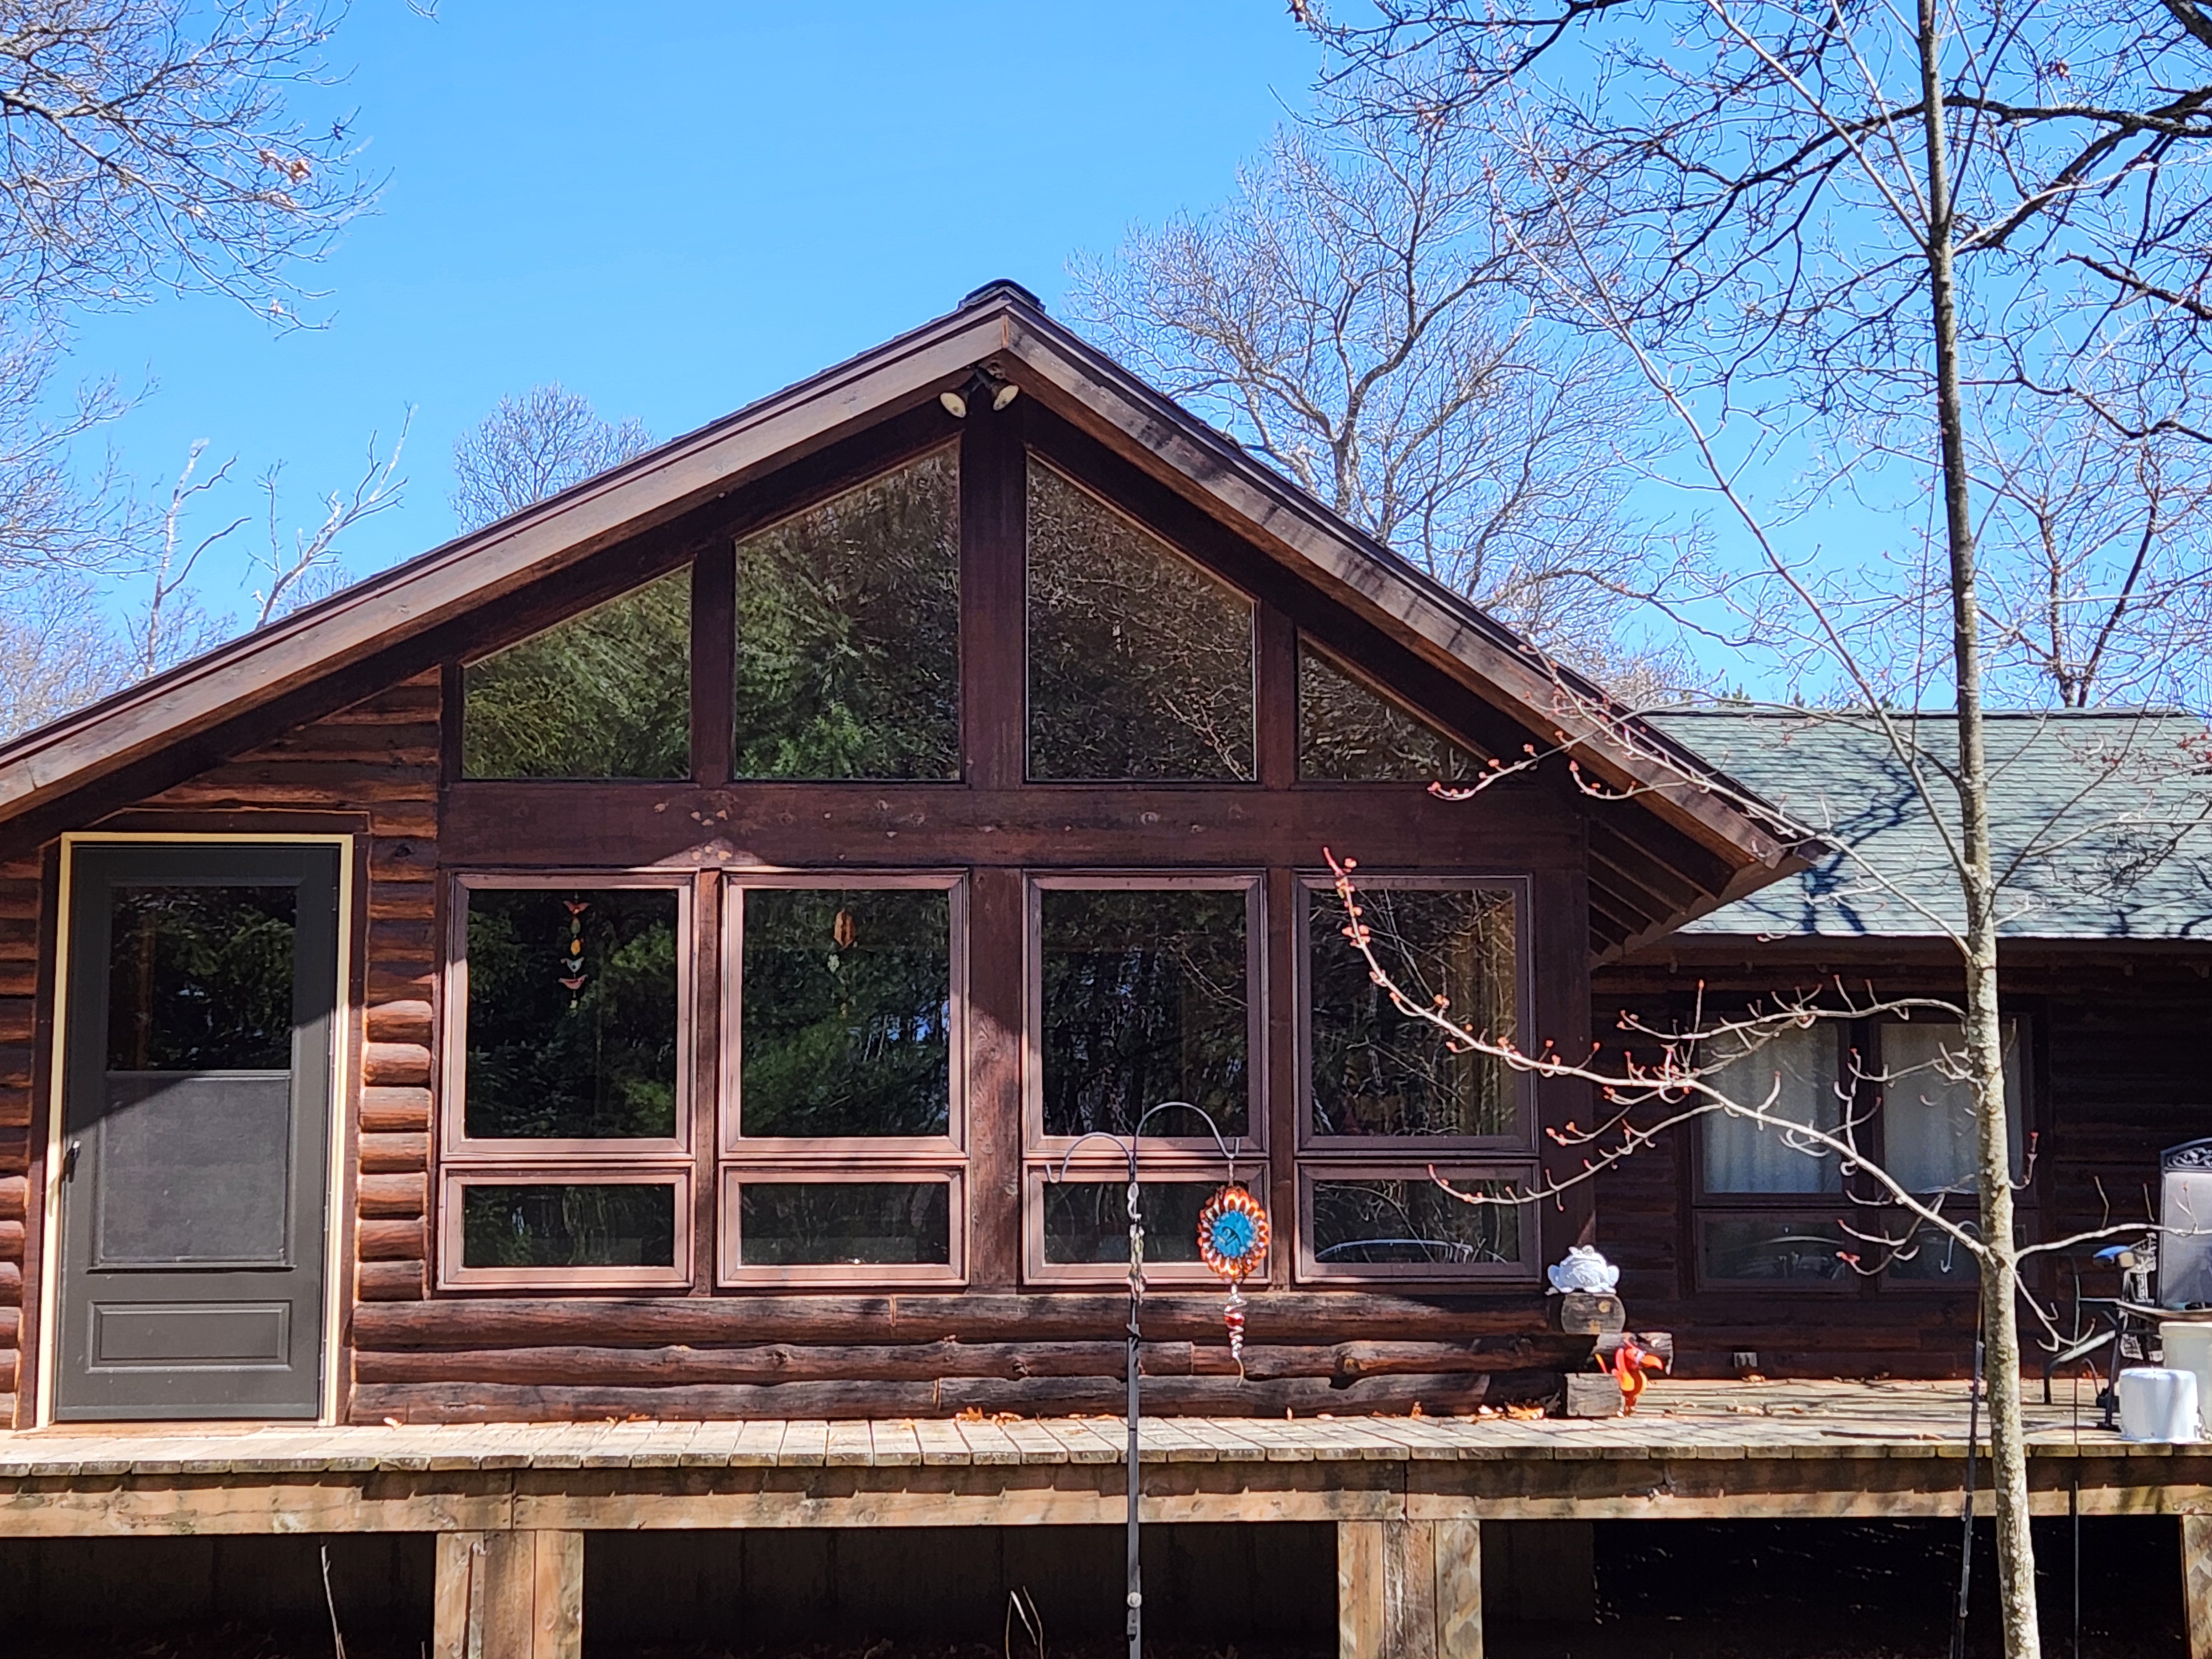 Professional Window Cleaning Performed on this Adams, WI Cabin